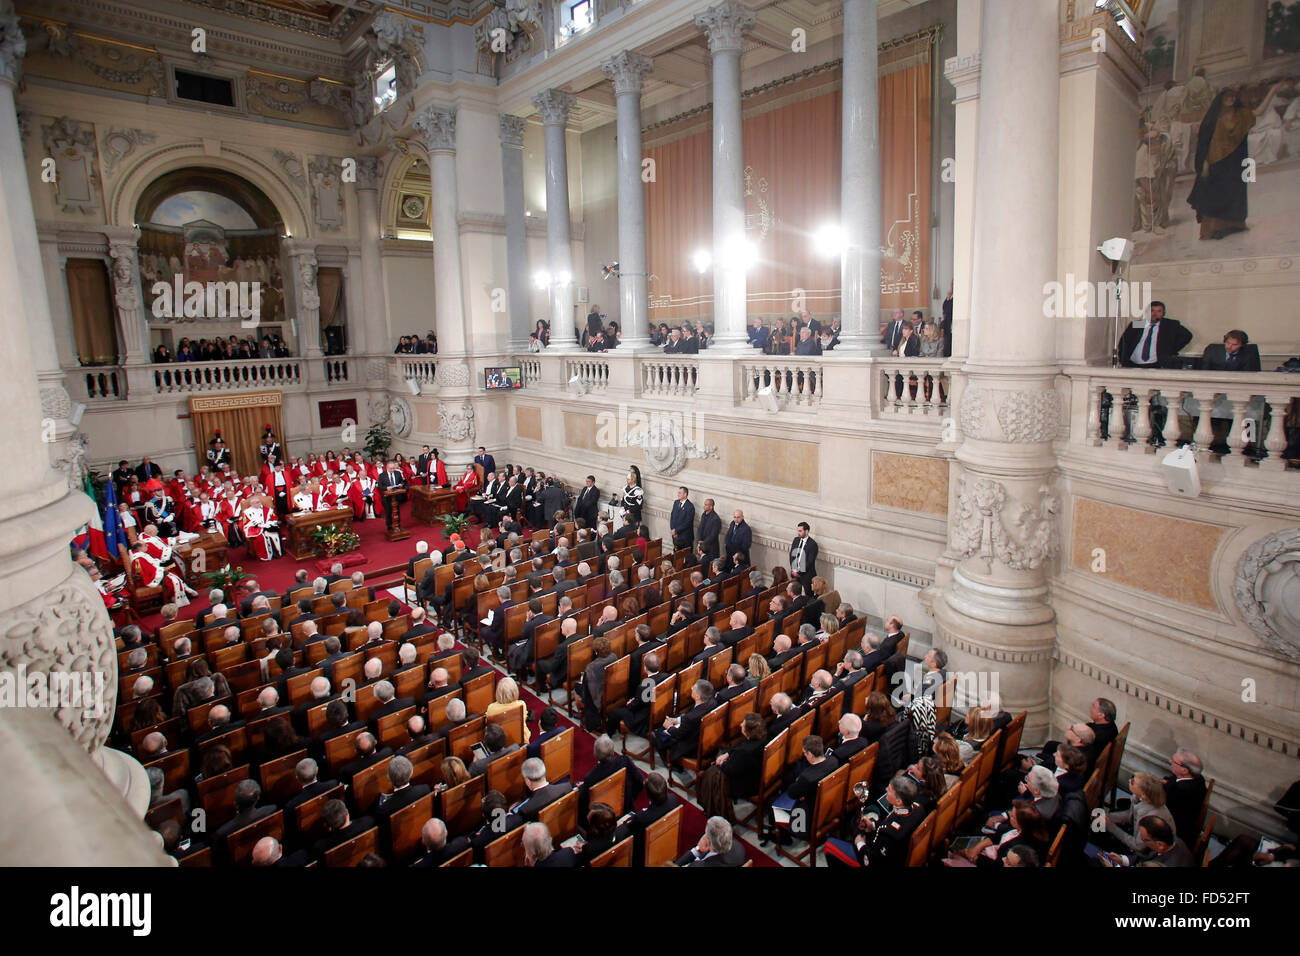 Rome, Italy. 28th Jan, 2016. View of the Hall Rome 28th January 2016 Justice Palace. Opening of the judicial year at the Court of Cassation. Credit:  Samantha Zucchi/Insidefoto/Alamy Live News Stock Photo